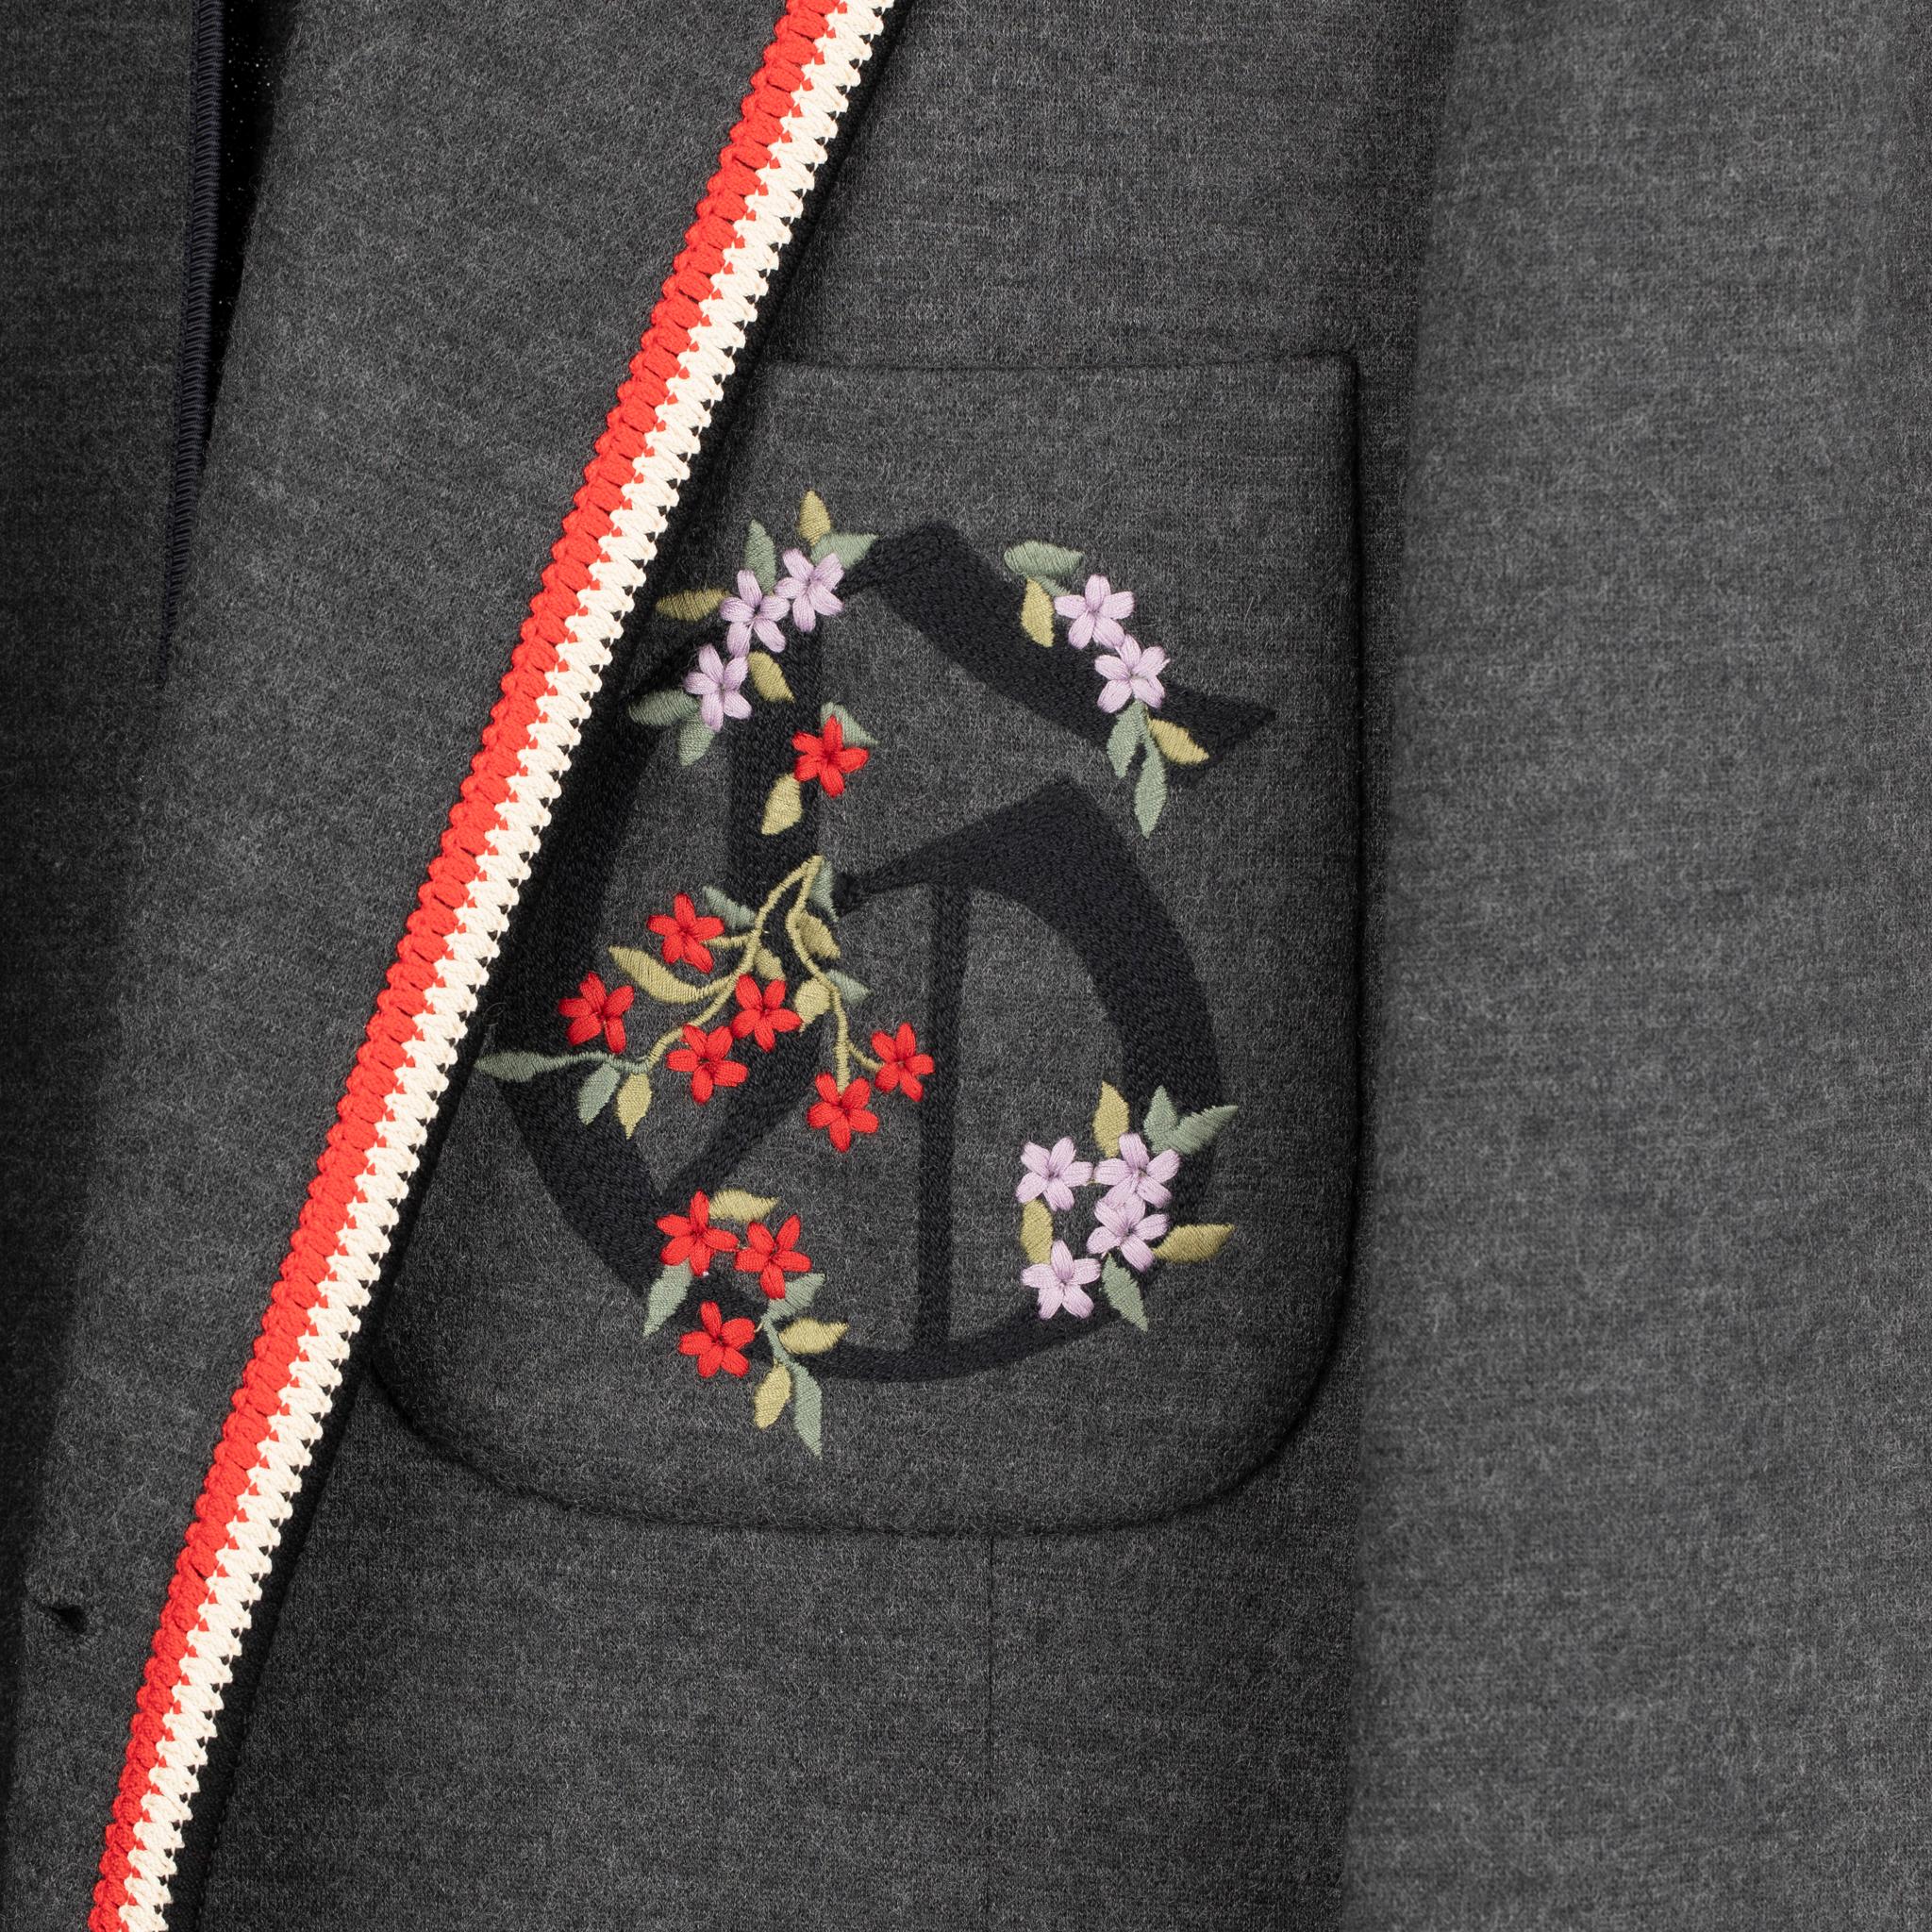 Gucci Mens Grey Blazer With Floral Embroidery

Brand:

Gucci

Product:

Mens Grey Blazer With Floral Embroidery

Size:

48 It

Colour:

Grey, Red & Ivory

Material

80% Wool & 20% Cotton

Condition:

Pristine; New Or Never Worn

Details:

- 2 Button